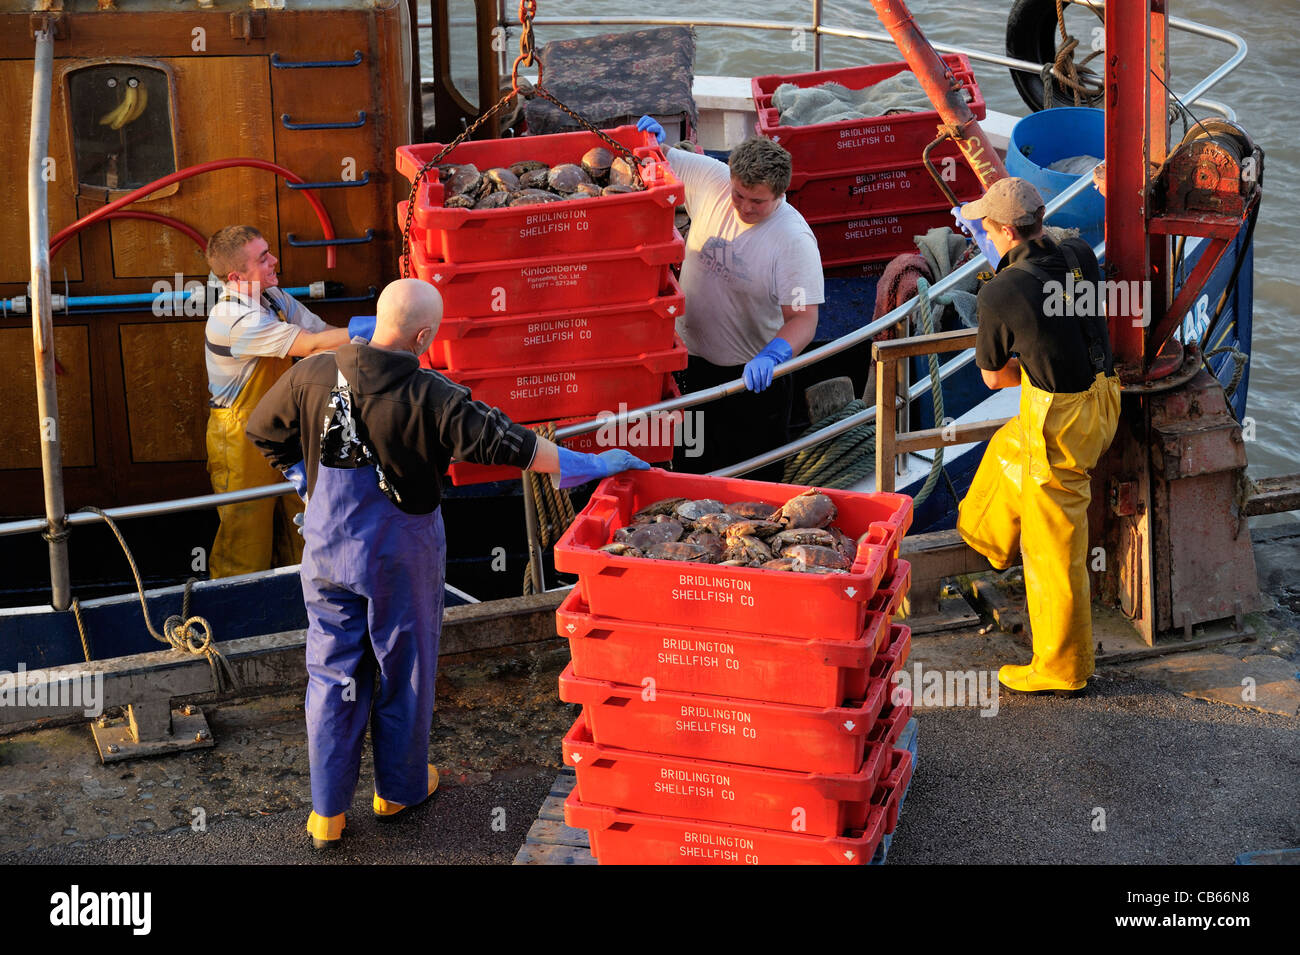 North Sea fishermen unload catch of crabs from fishing boat Onward Star at the East Yorkshire fish quay harbour of Bridlington Stock Photo